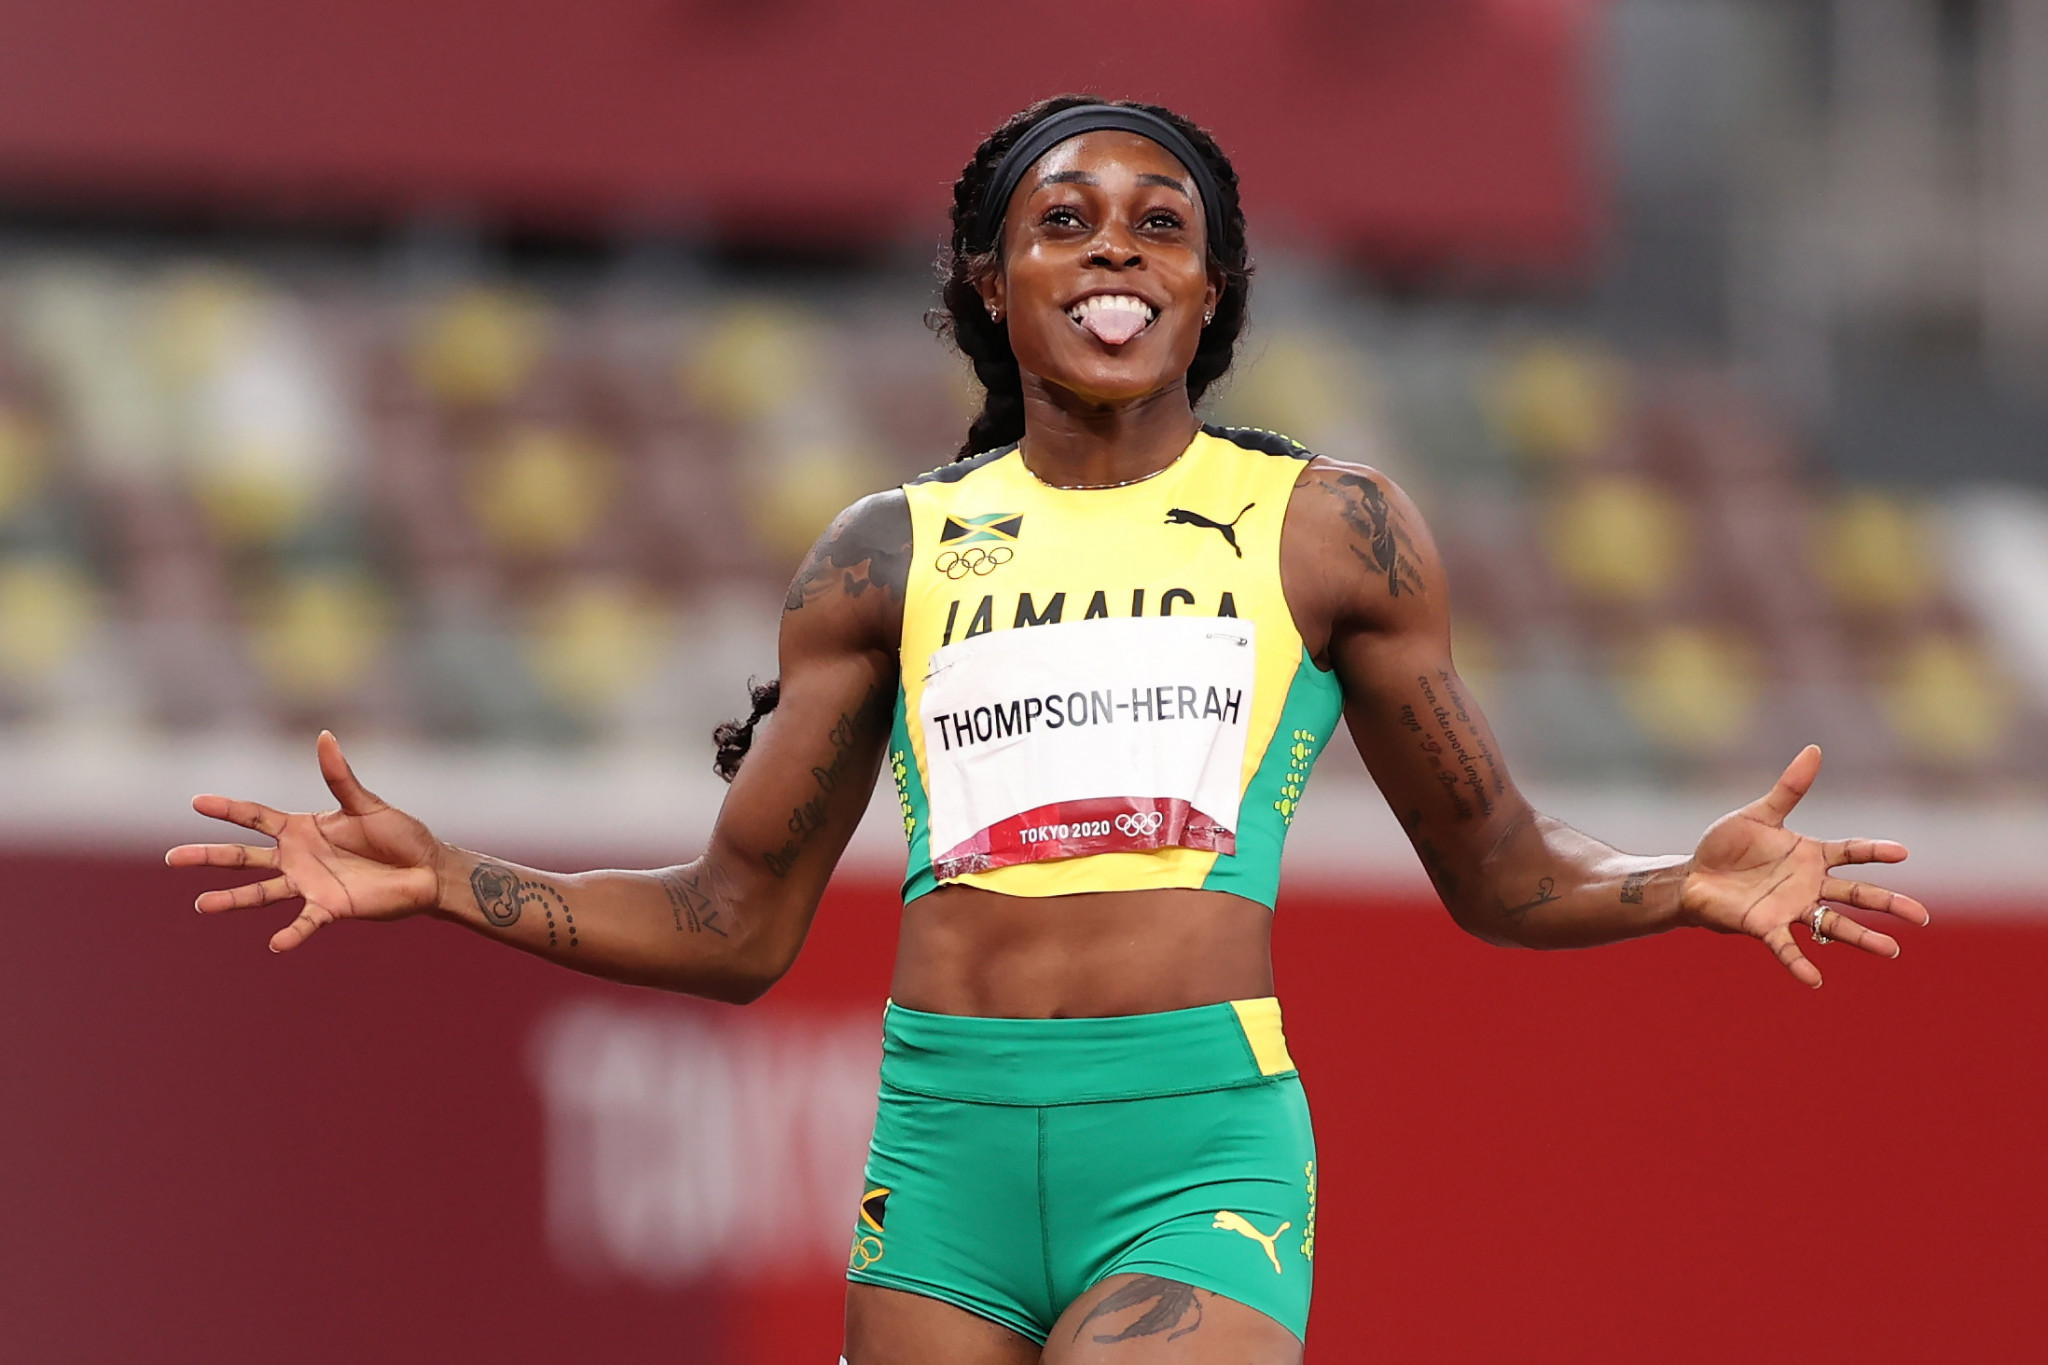 ANOC decision to overlook Thompson-Herah for best female athlete of Tokyo 2020 criticised